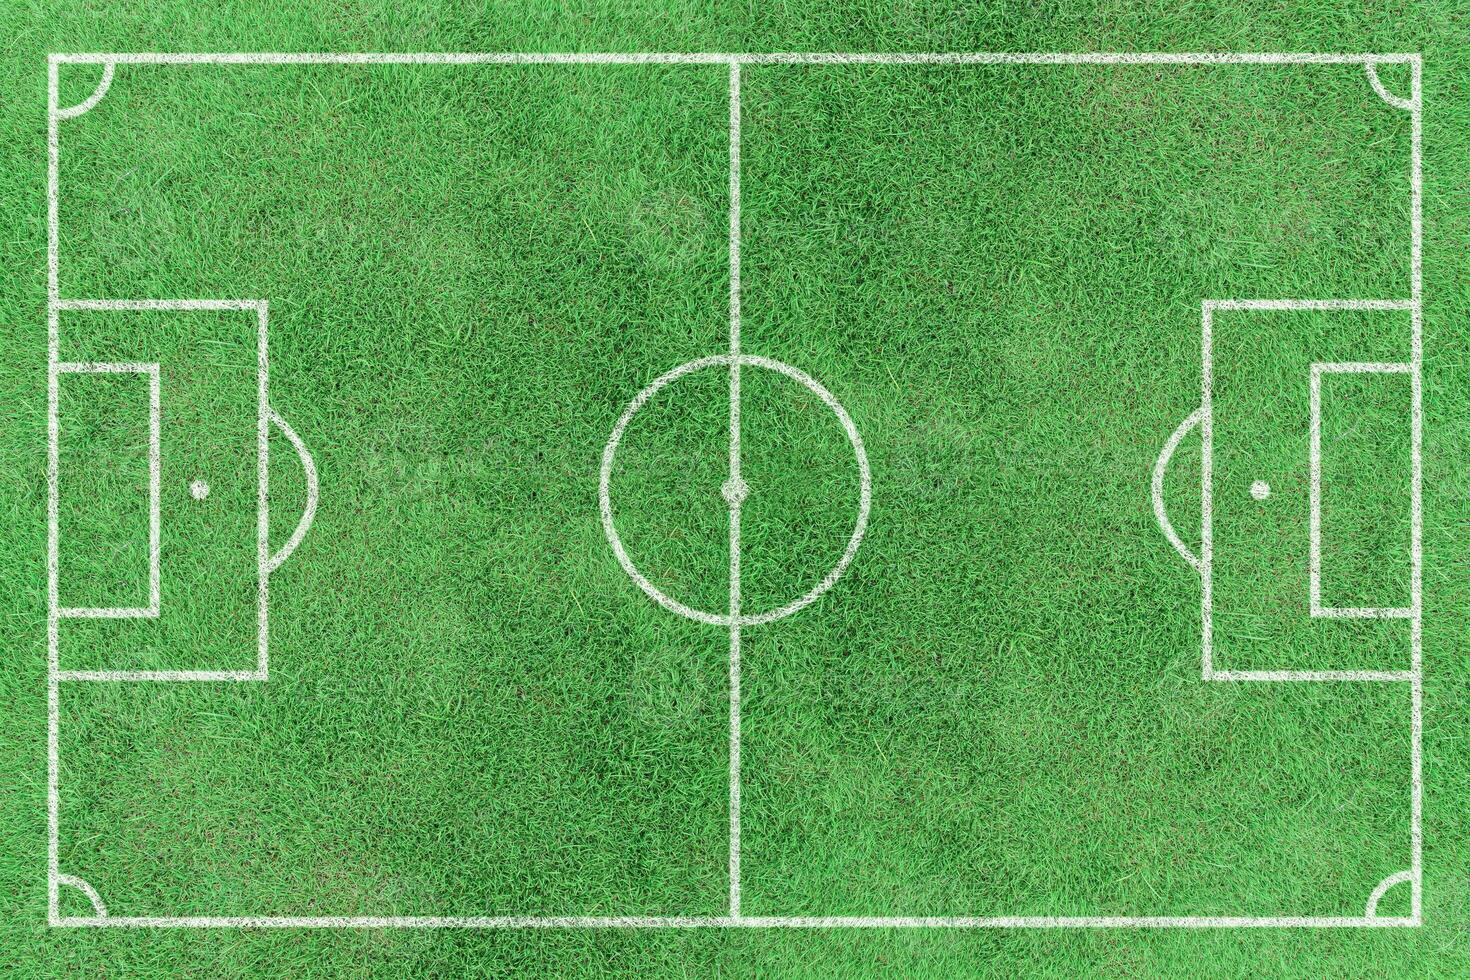 Soccer field. Stripe grass football stadium. Green lawn with white lines pattern. Top view photo